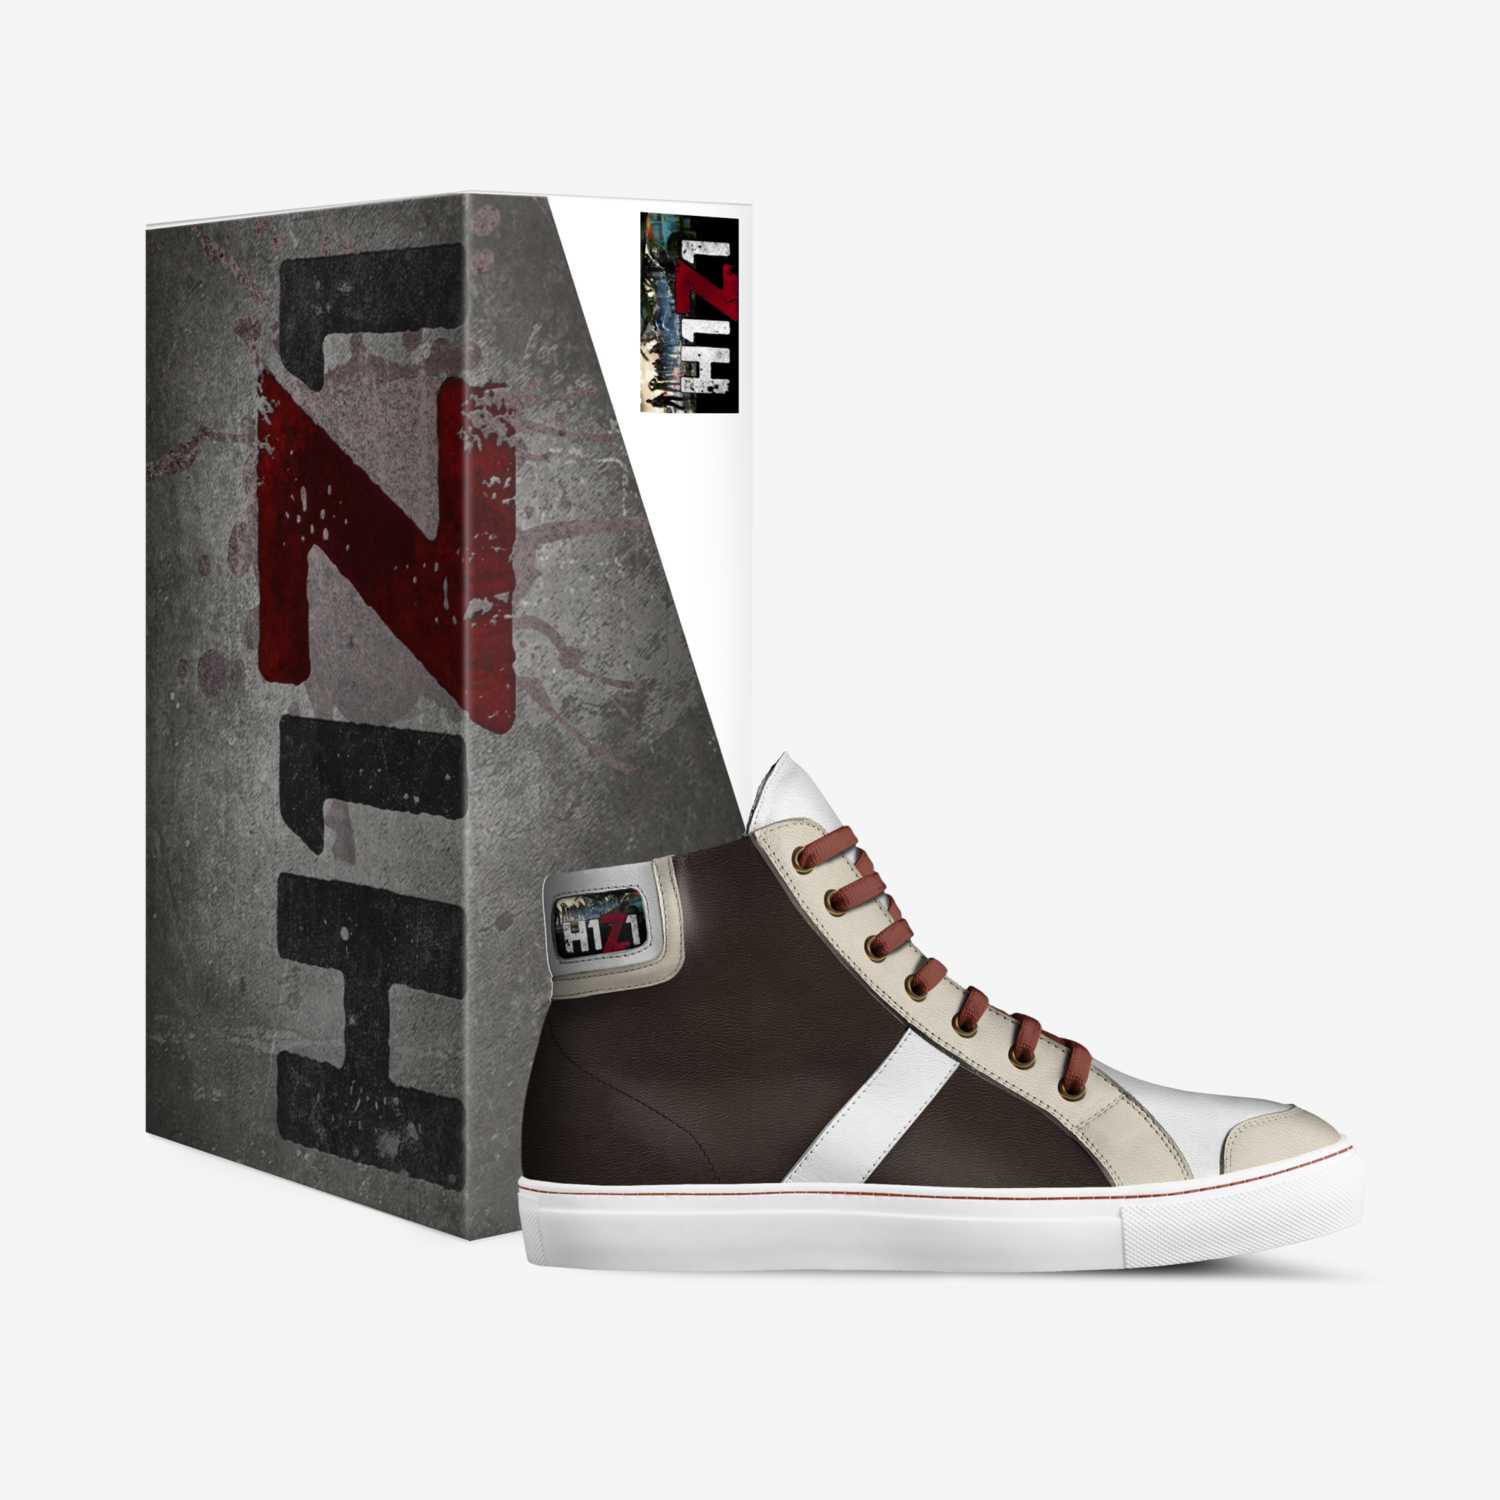 H1Z1 custom made in Italy shoes by Sorin Baltaru | Box view